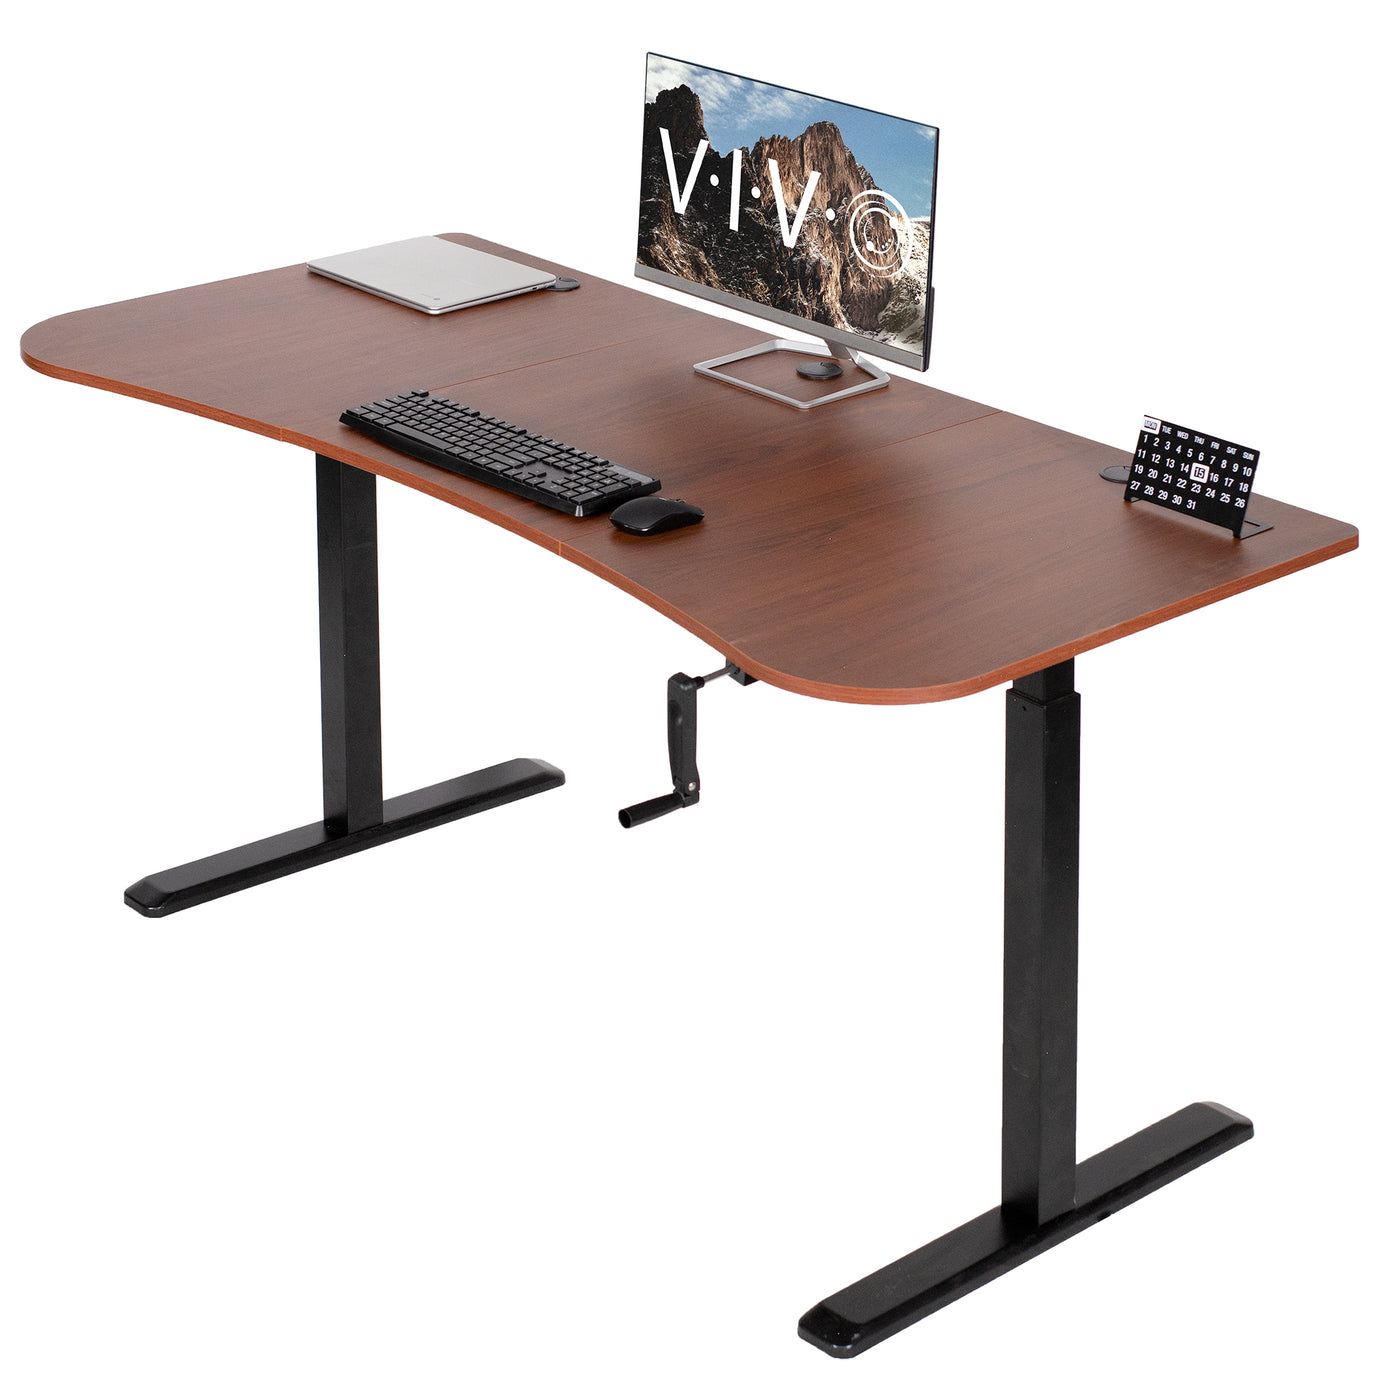 Sturdy manual hand crank height adjustable desk for sit or stand workstation.